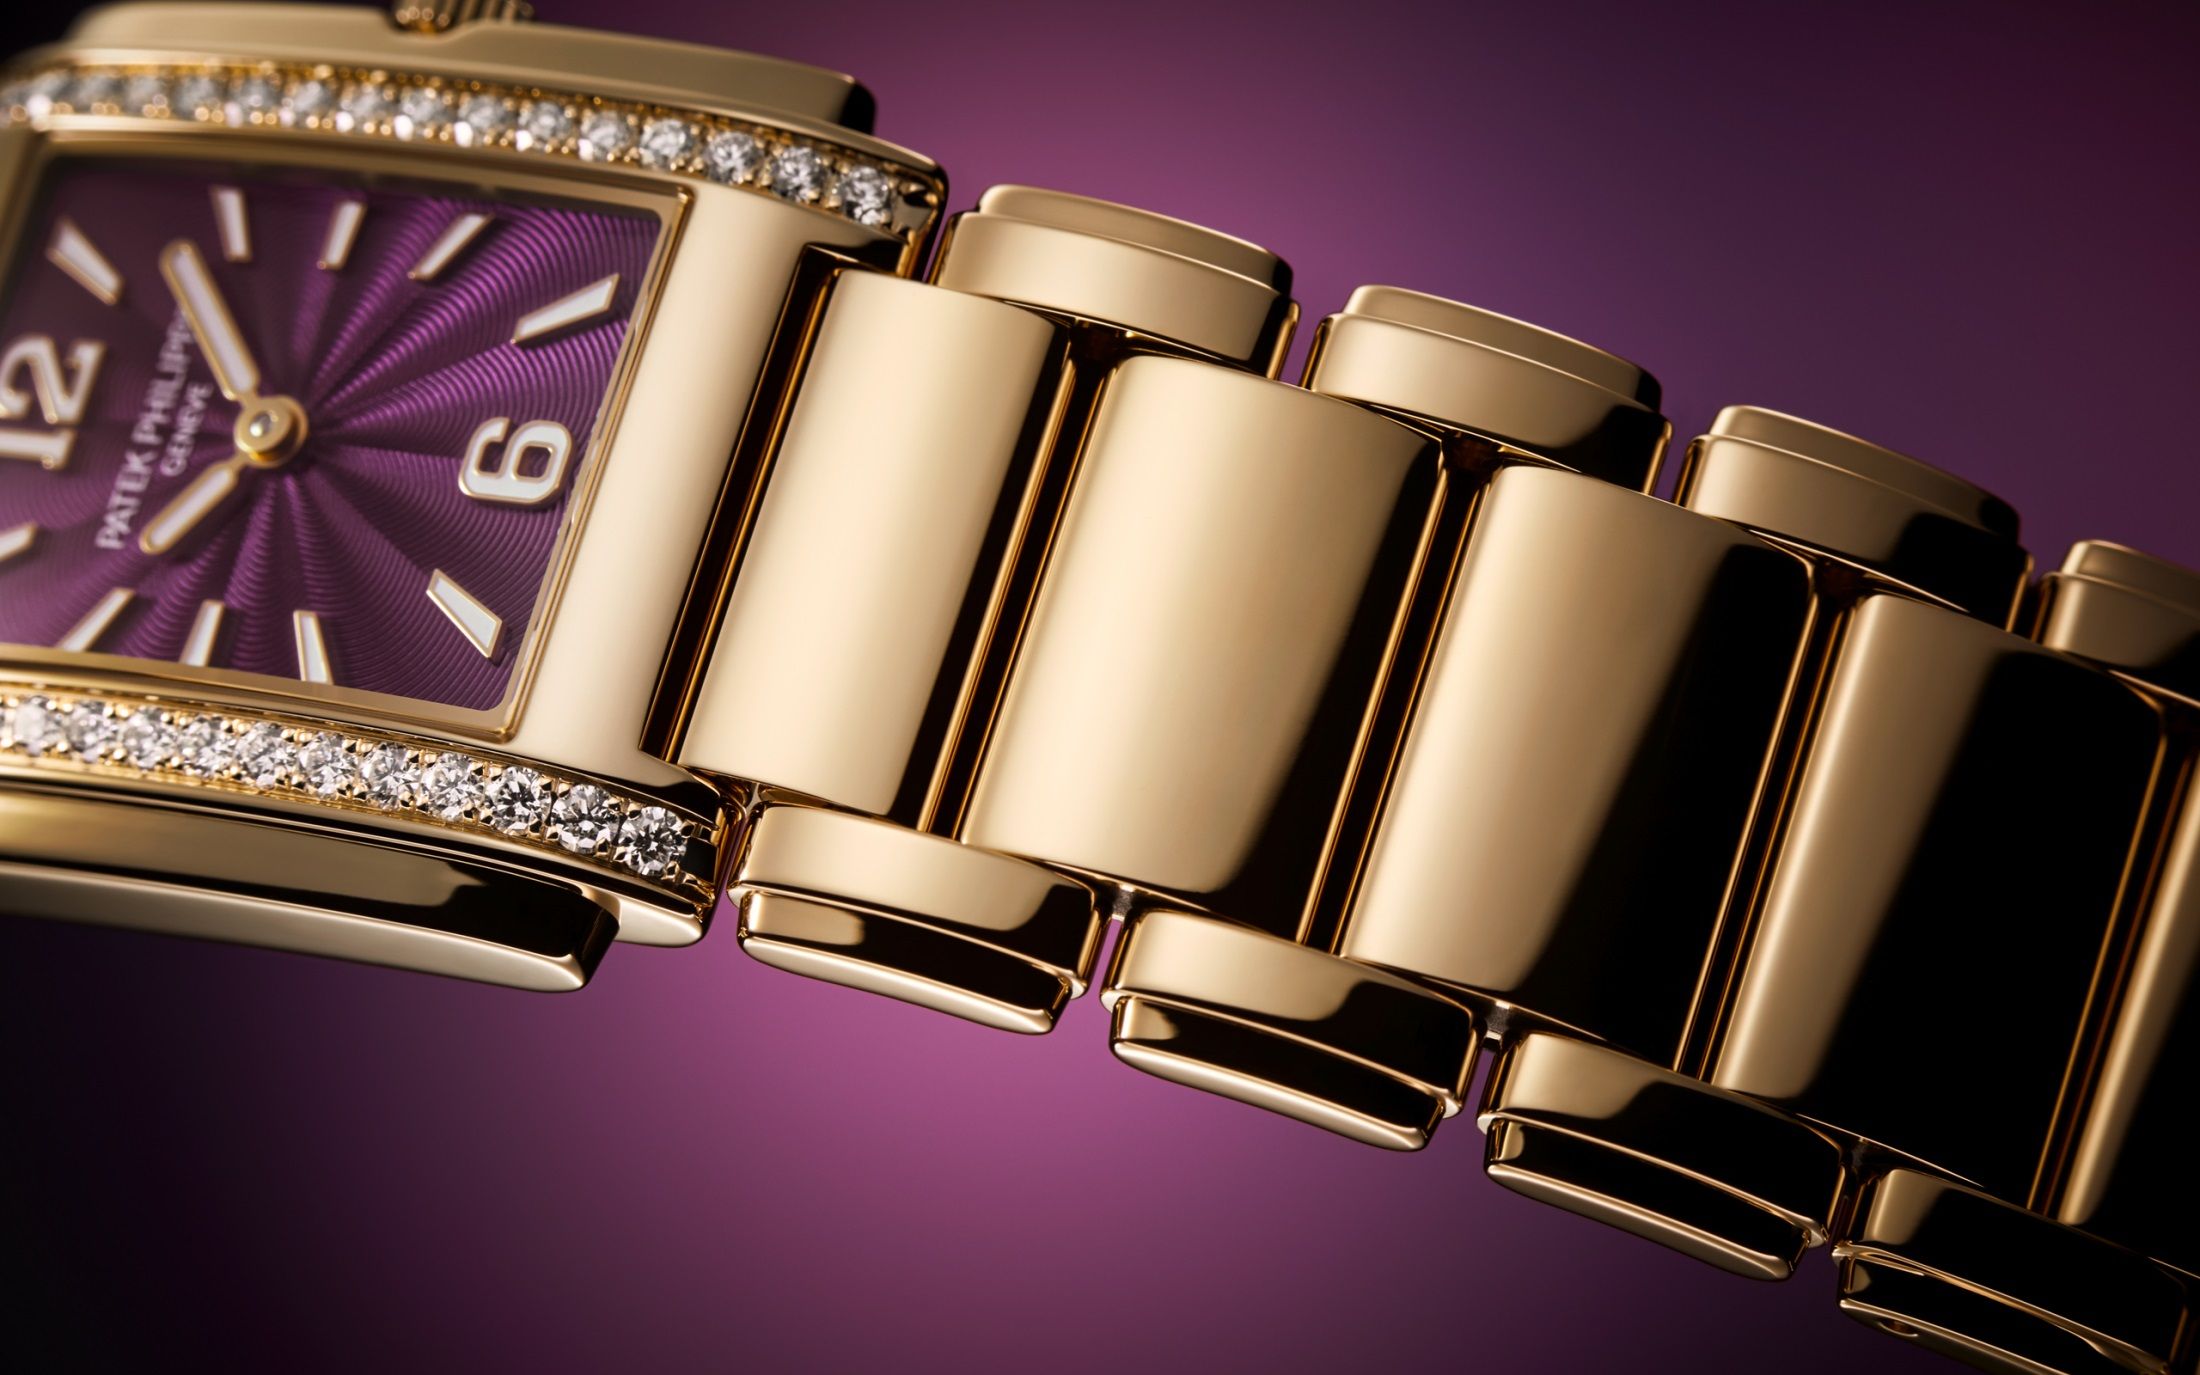 Patek Philippe is introduces a new version of the quartz cuff-style model in the Twenty-4 collection